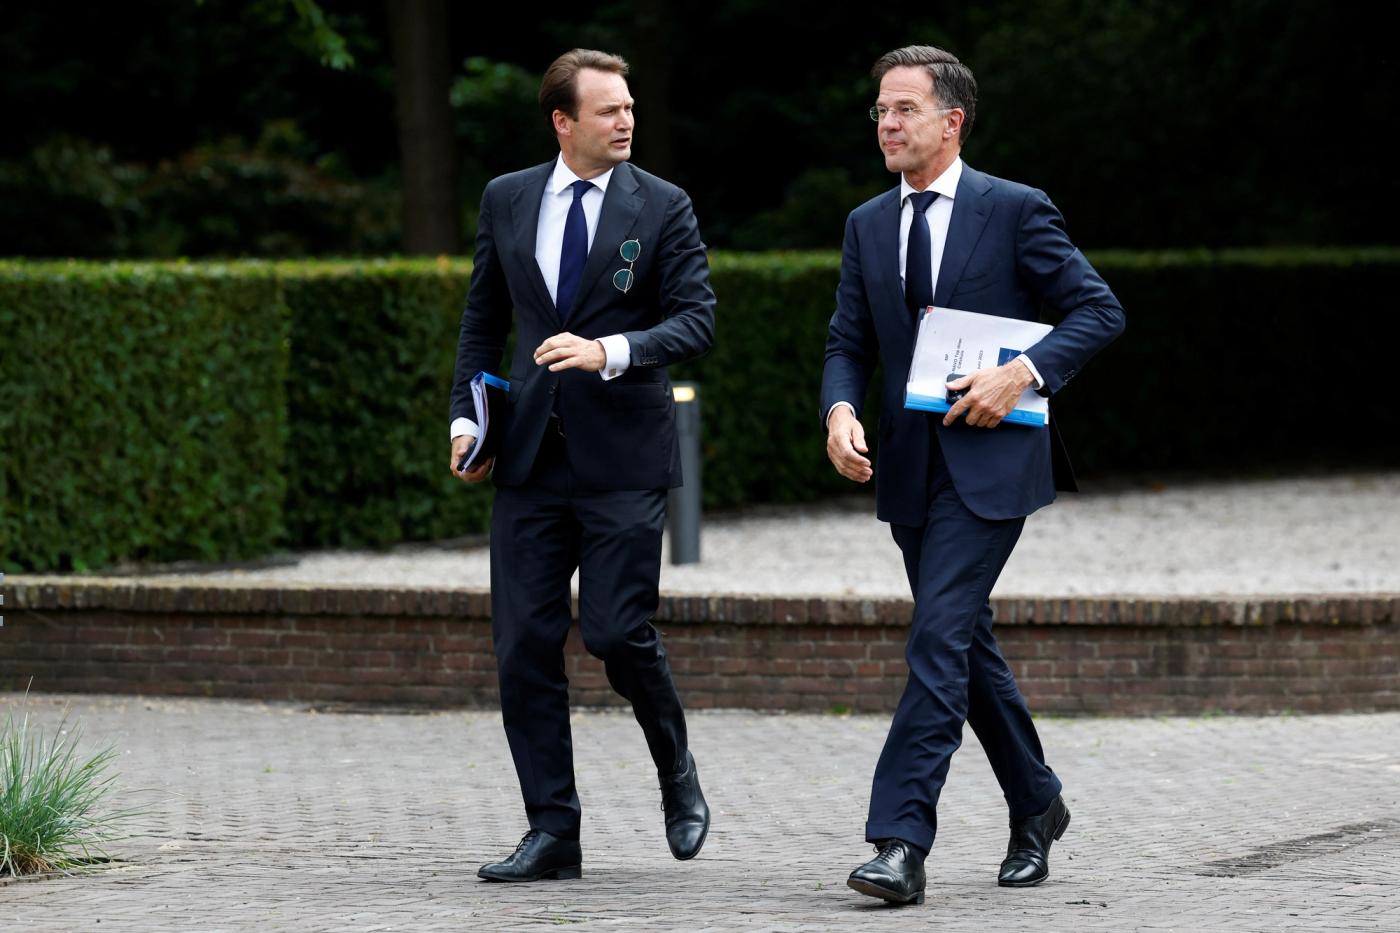 Dutch Prime Minister Mark Rutte walks with Foreign Affairs and Defence Advisor to the Prime Minister of the Netherlands, Geoffrey van Leeuwen.